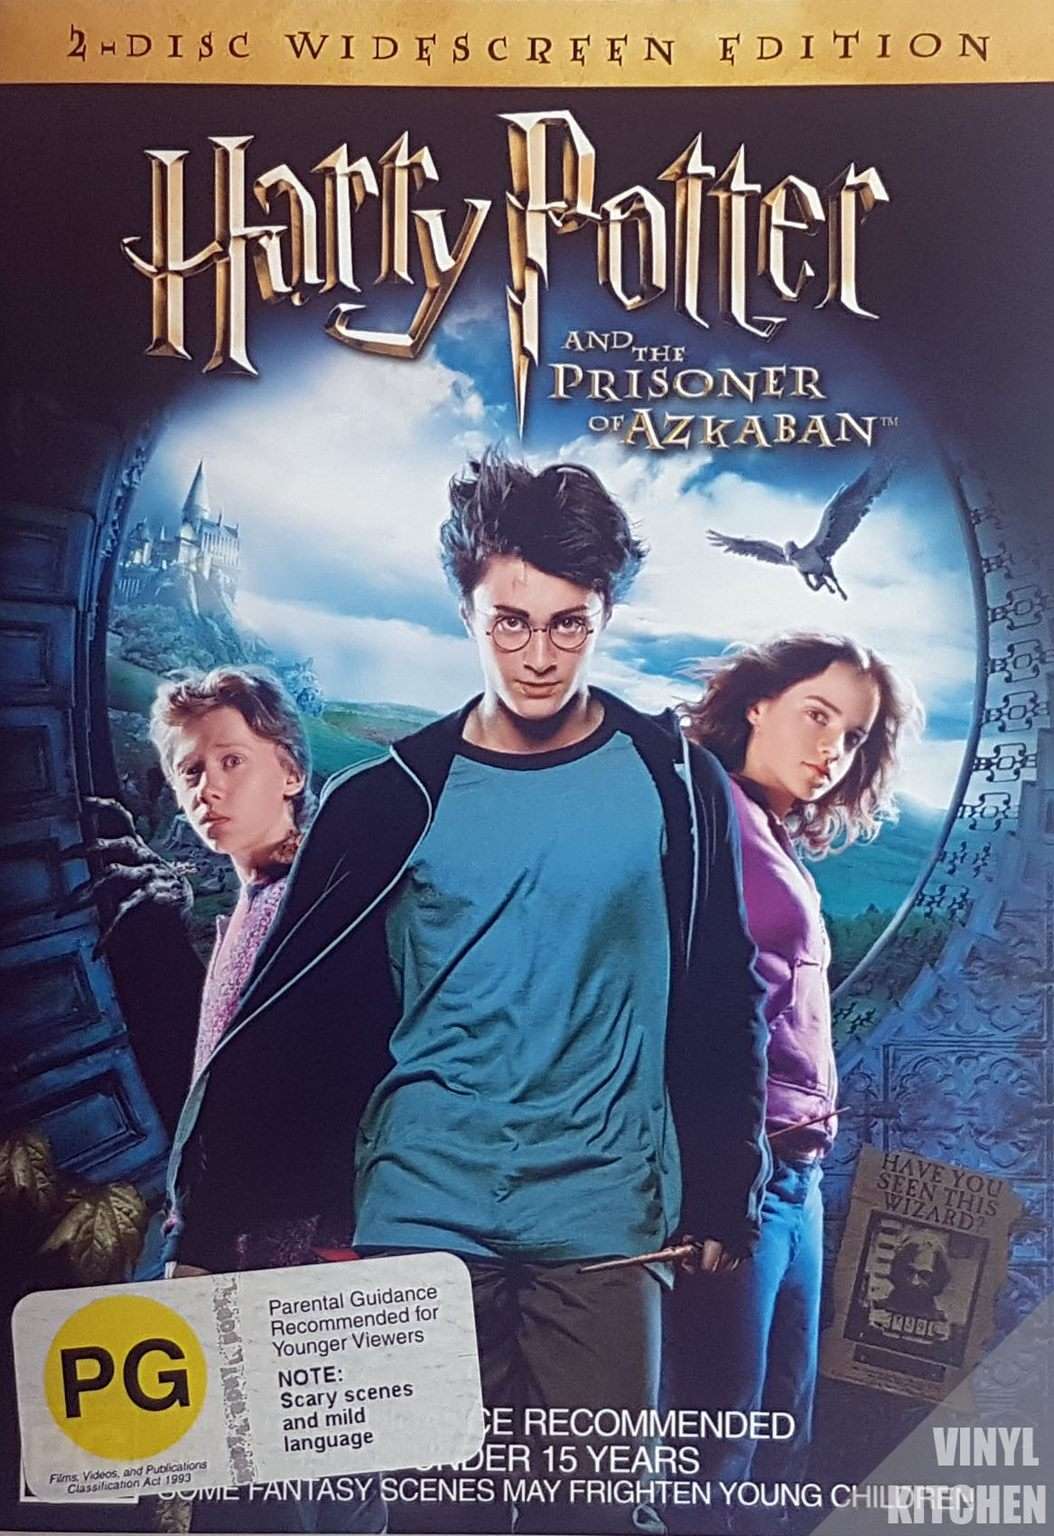 Harry Potter and the Prisoner of Azkaban 2 Disc Widescreen Edition